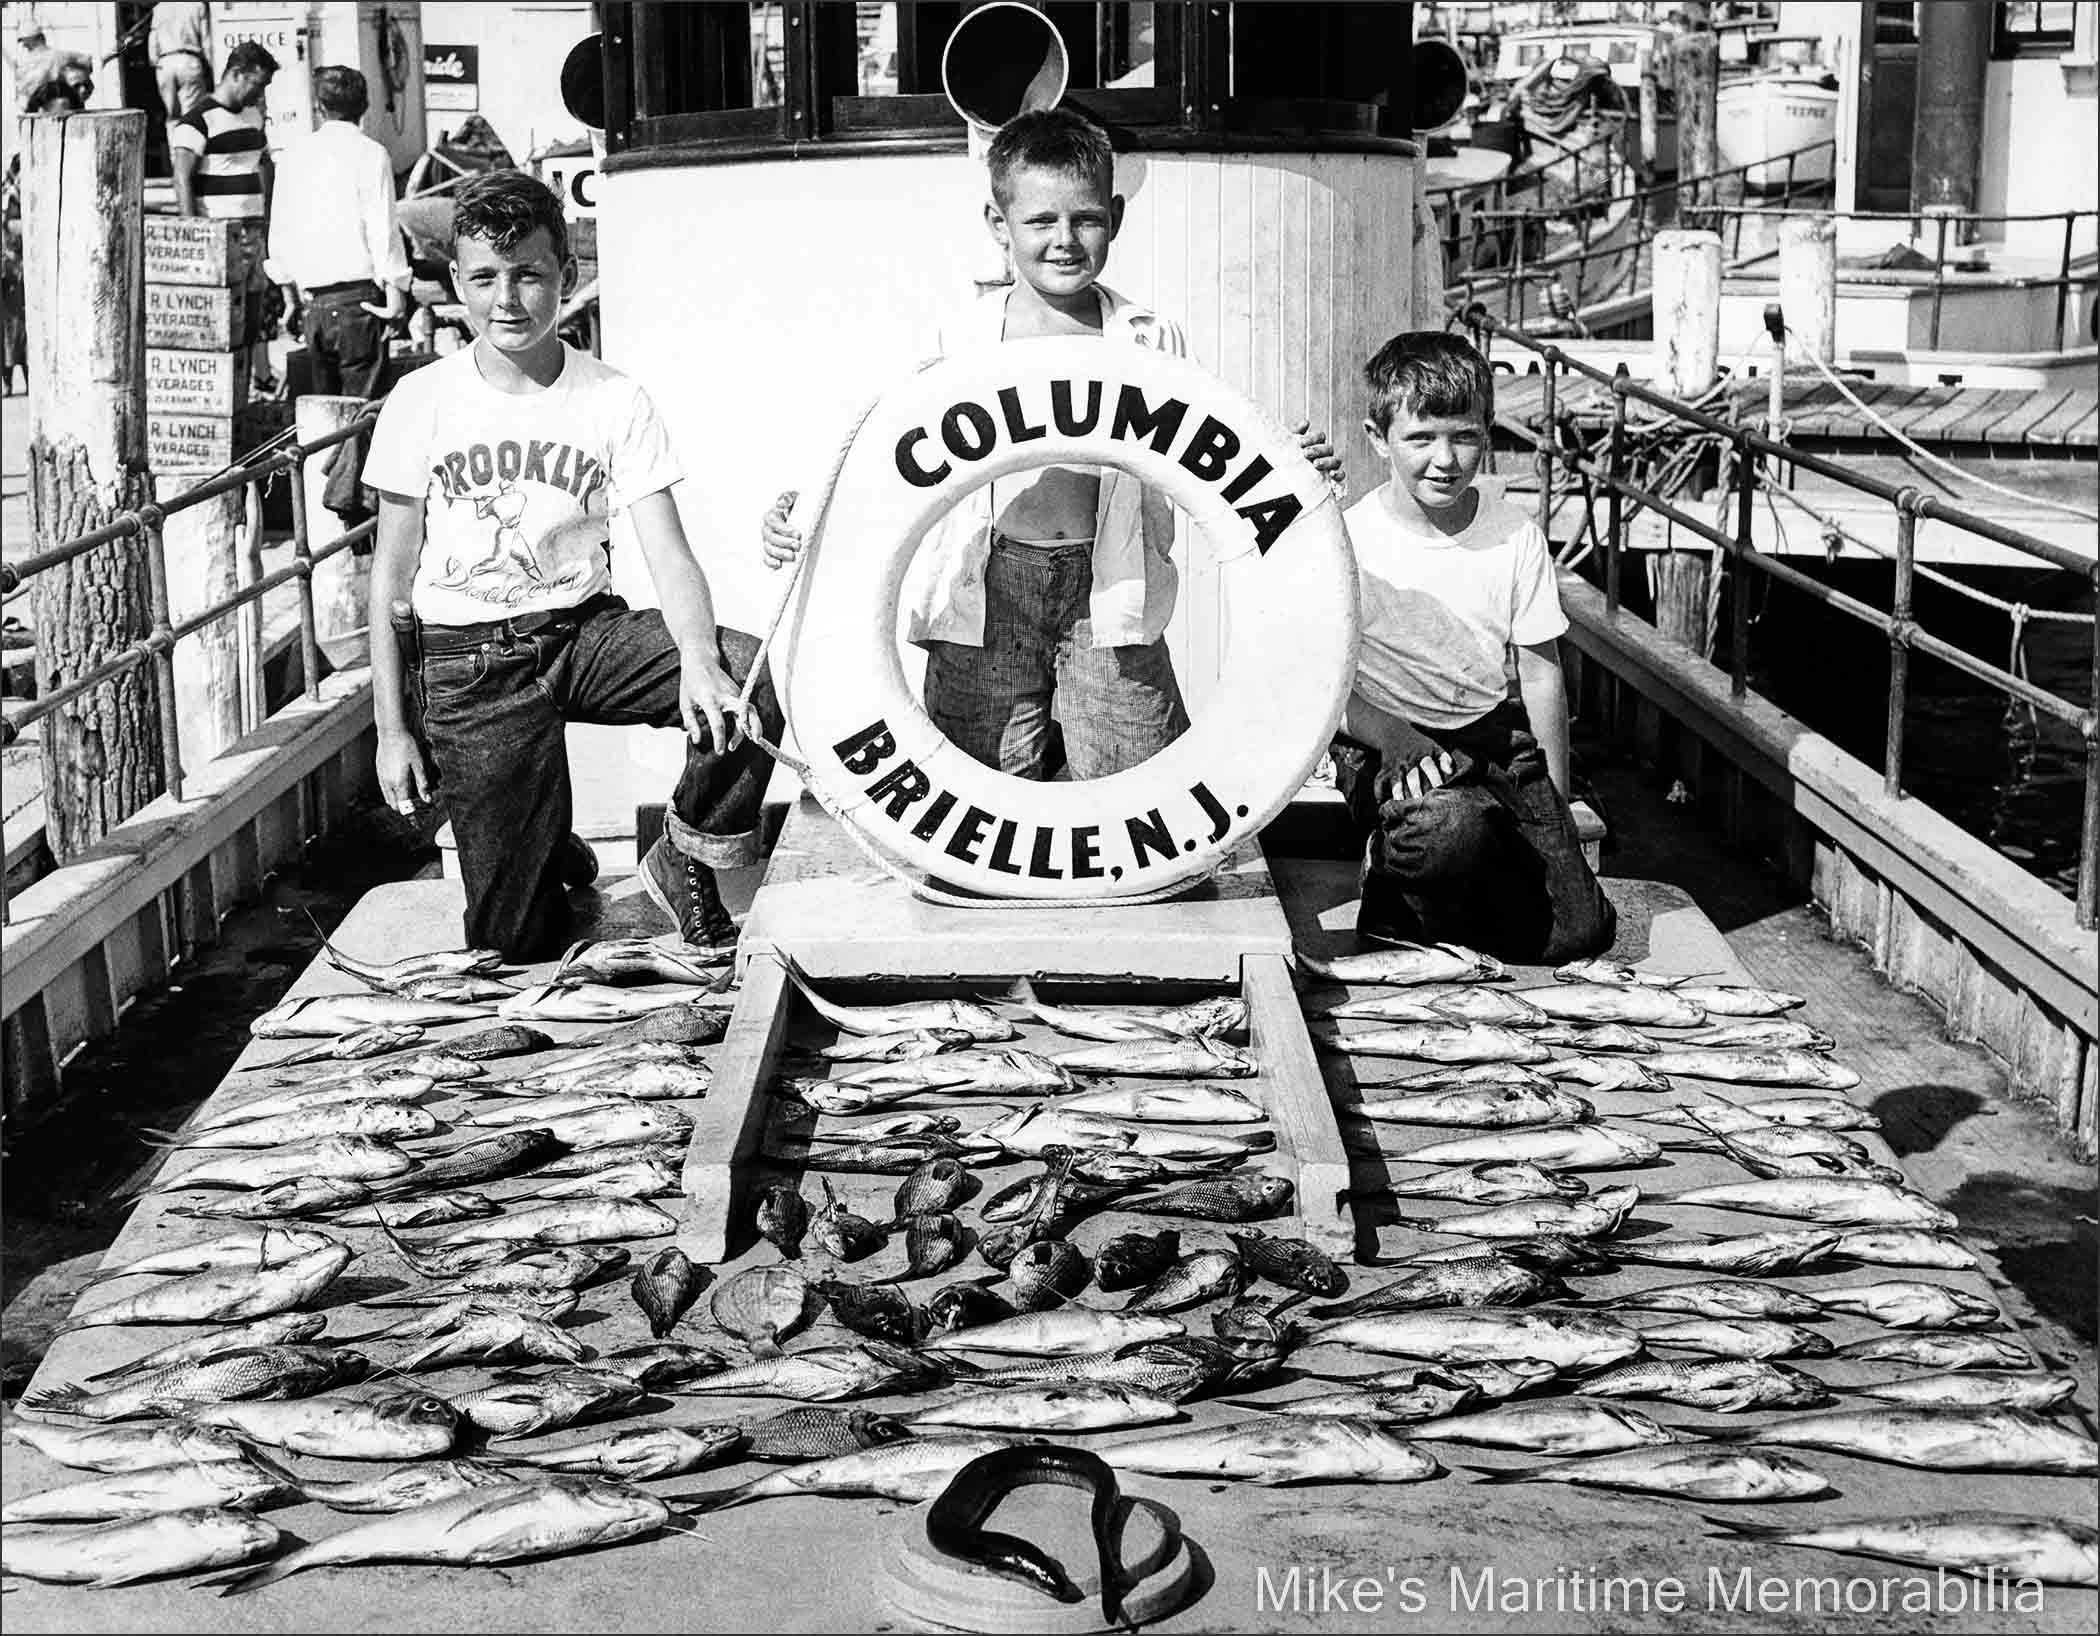 COLUMBIA fishing trip – 1950 The results of a fishing trip aboard Captain Jack Bogan's "COLUMBIA" in August 1950. Like any young lads, they were out fishing on a boat with their pals and happy as clams. Shown left to right are Jackie McGuire, a 10-year old Dave Bogan Sr. and Bob Bogan Sr.